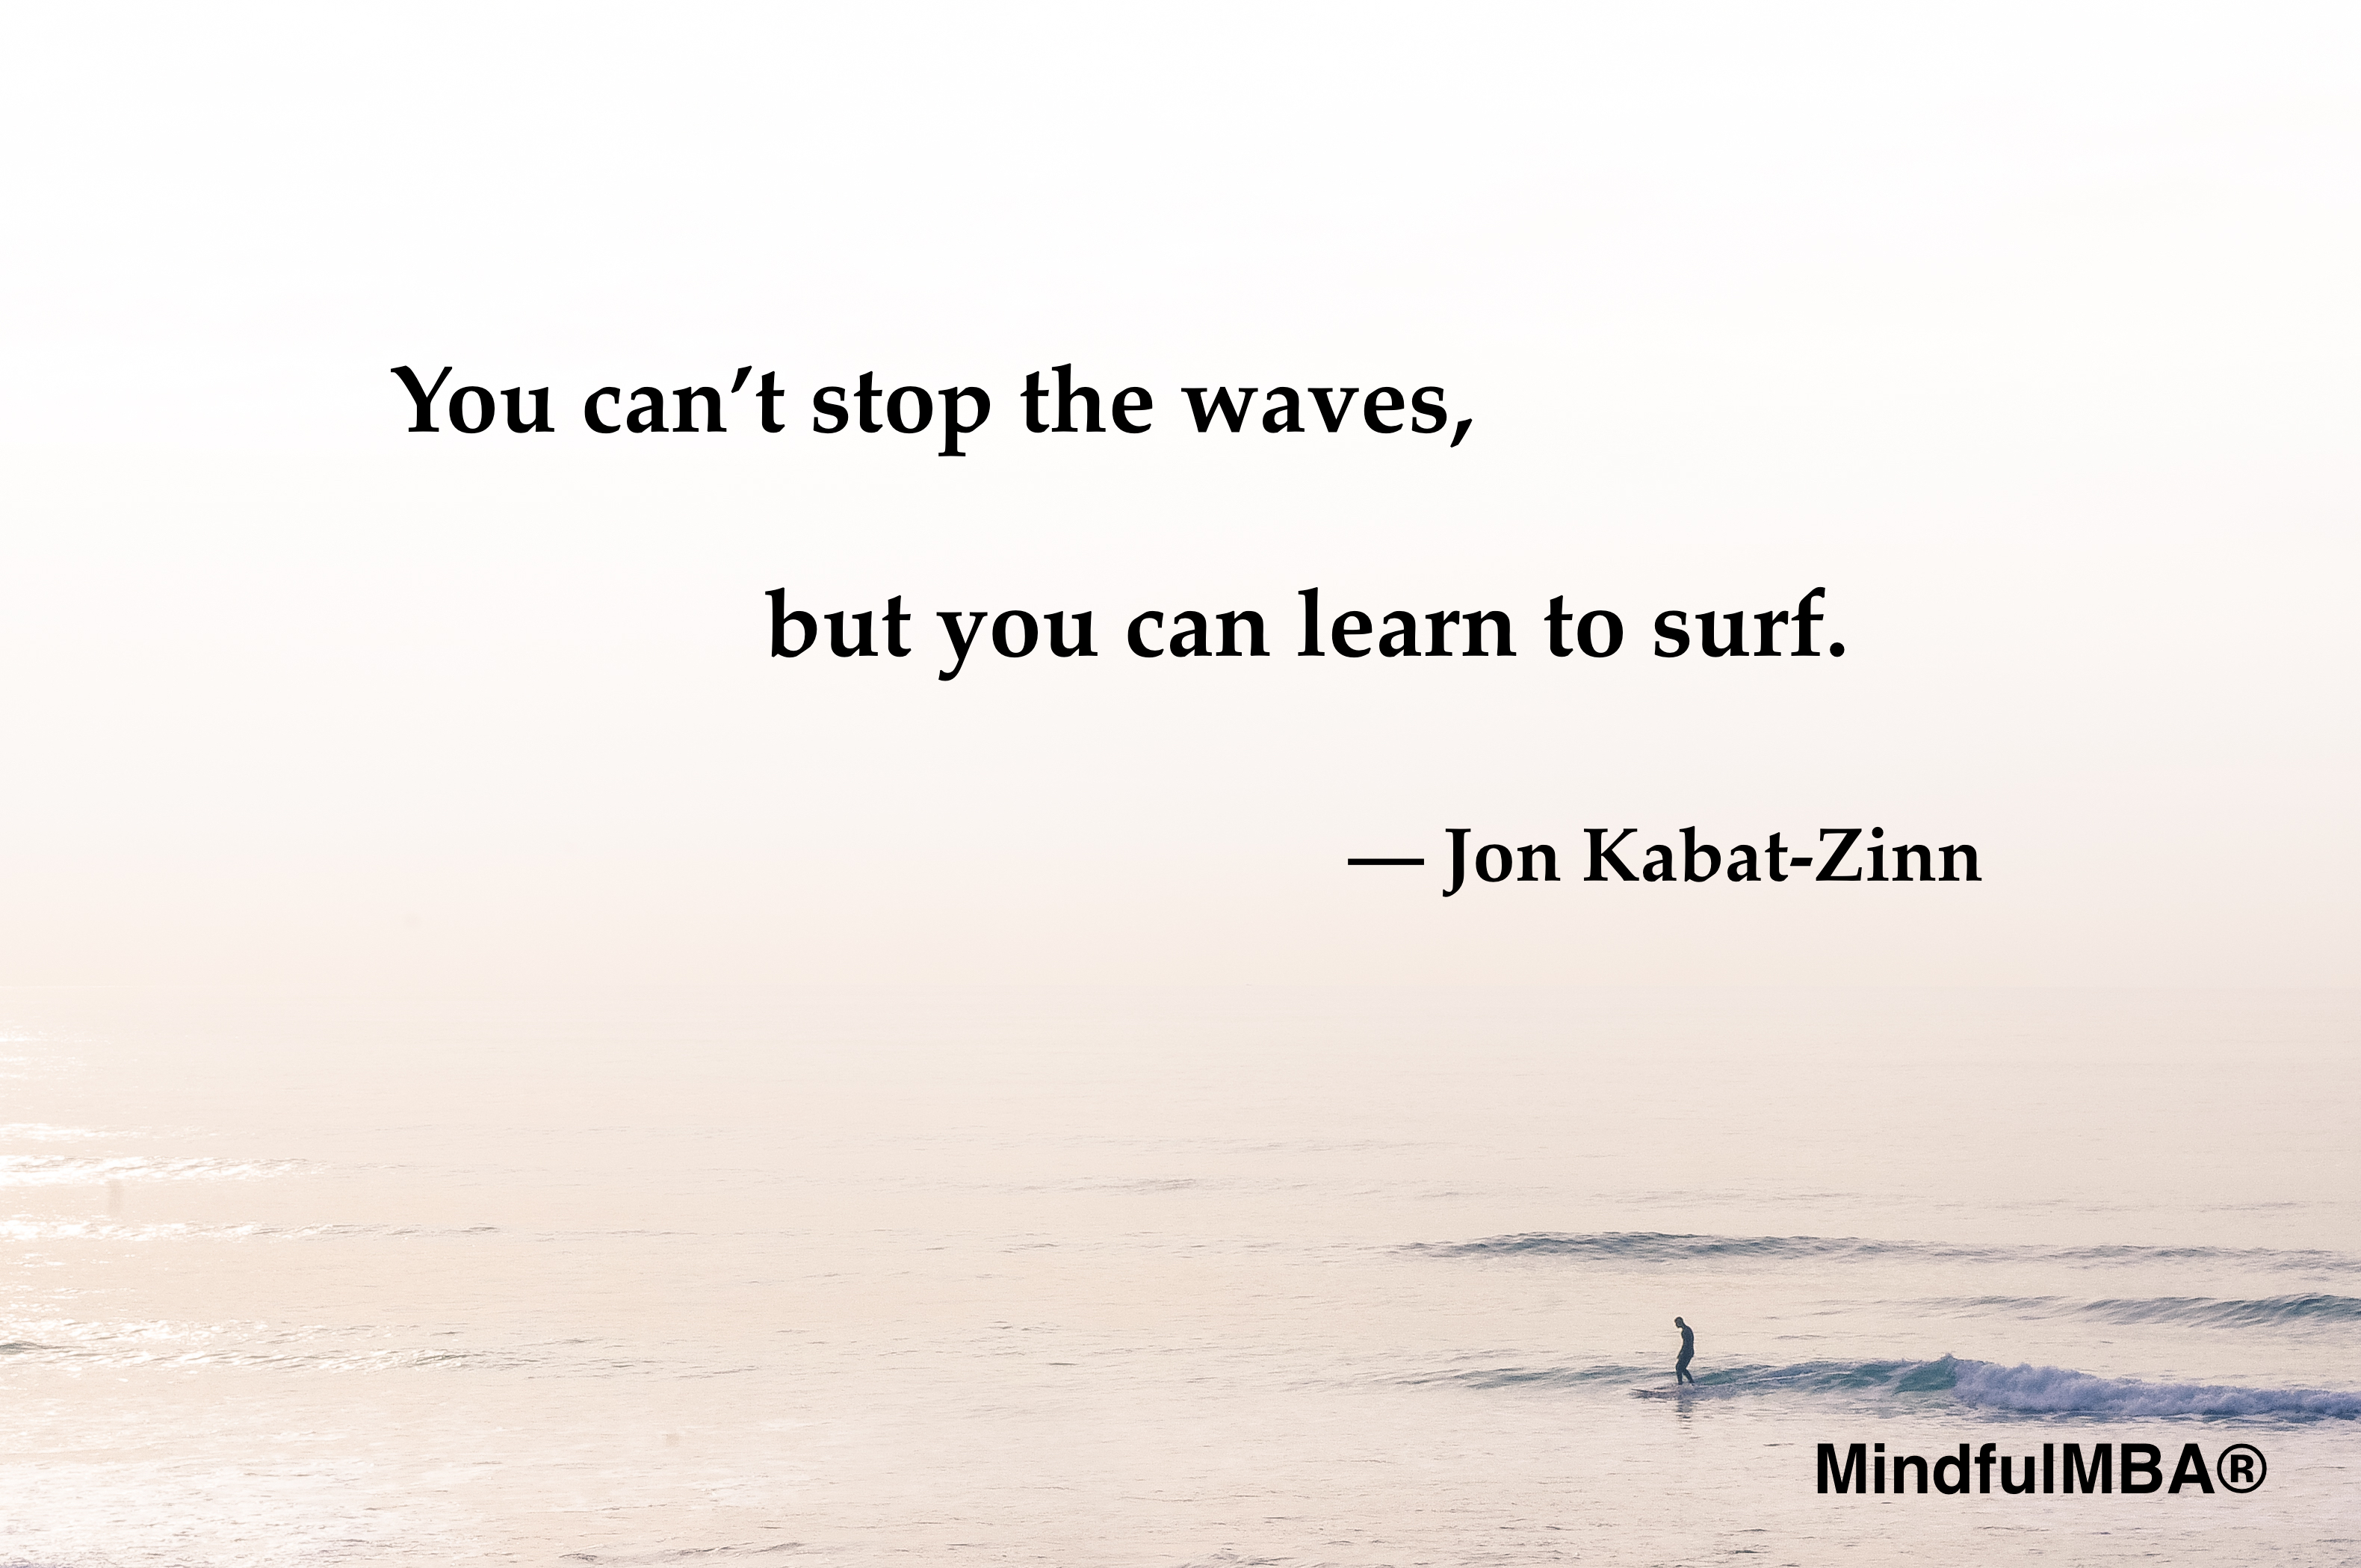 JKZ Waves Surf quote w tag